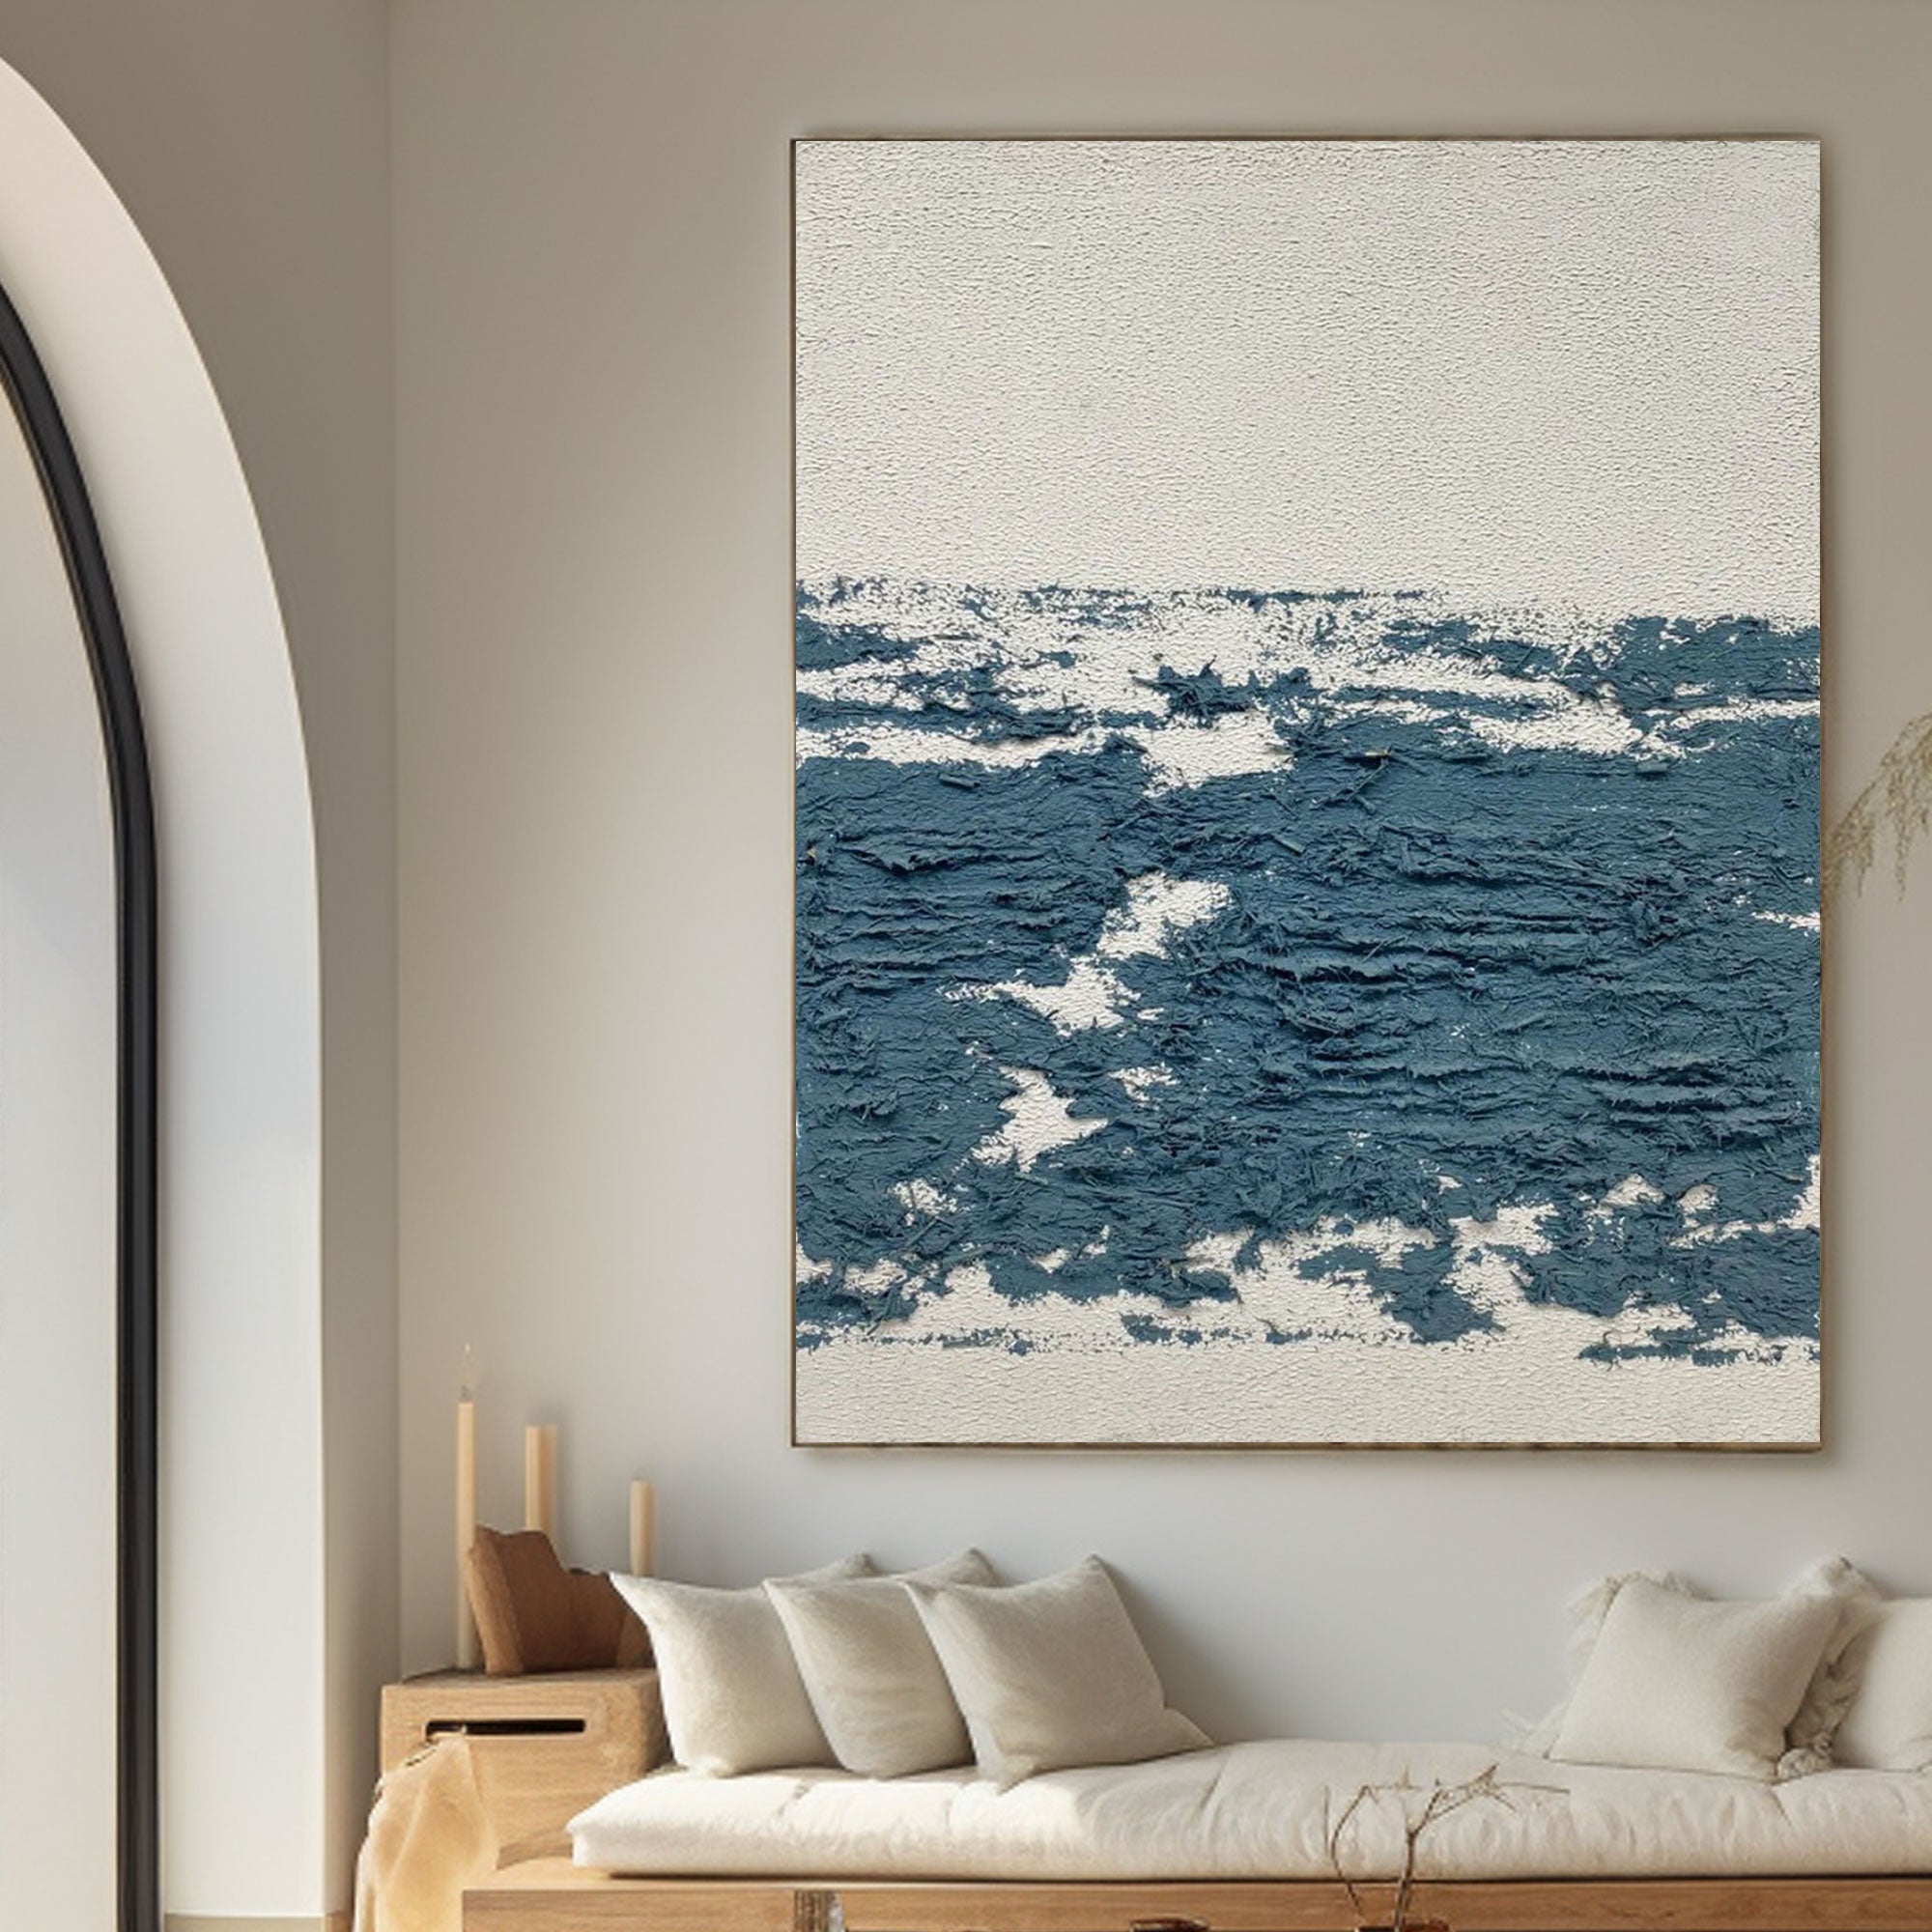 3D Textured Abstract Painting "Oceanic"